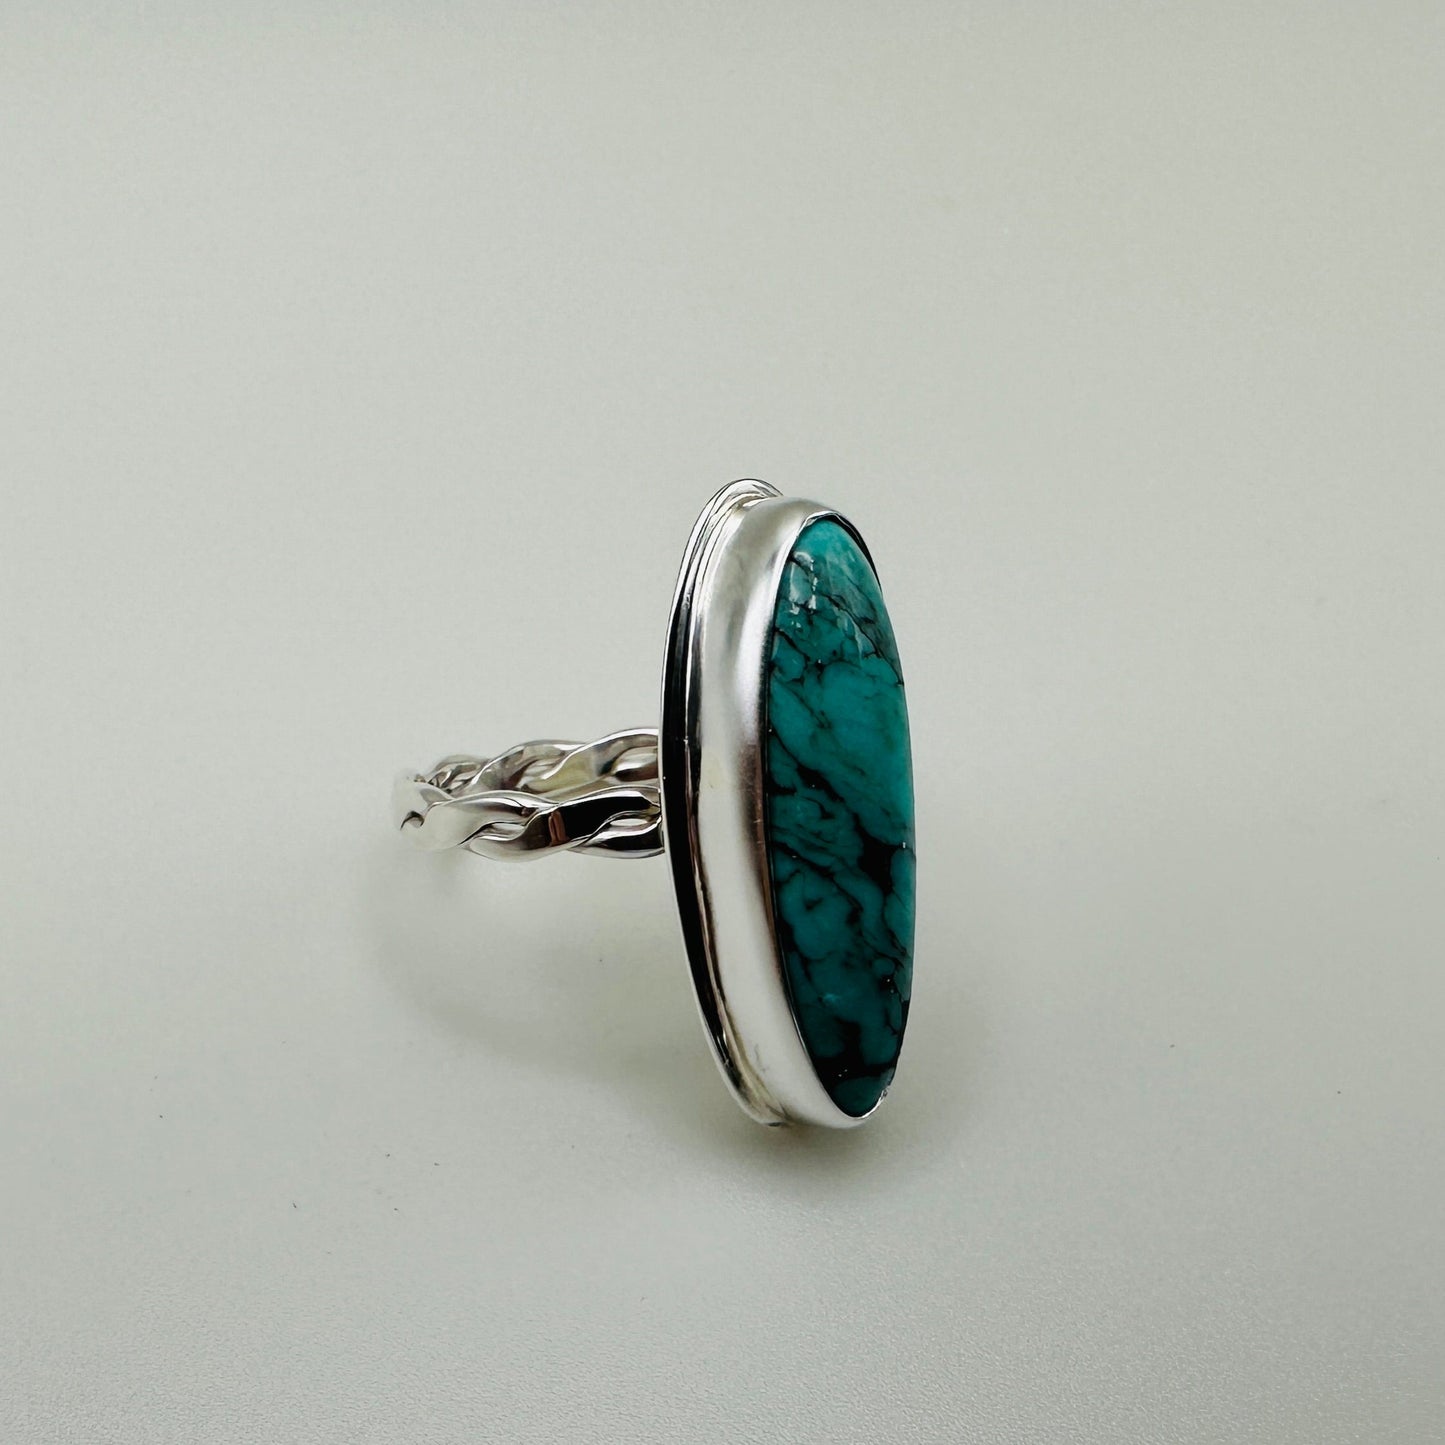 Kingman Turquoise Sterling Silver Ring, Size 6.5